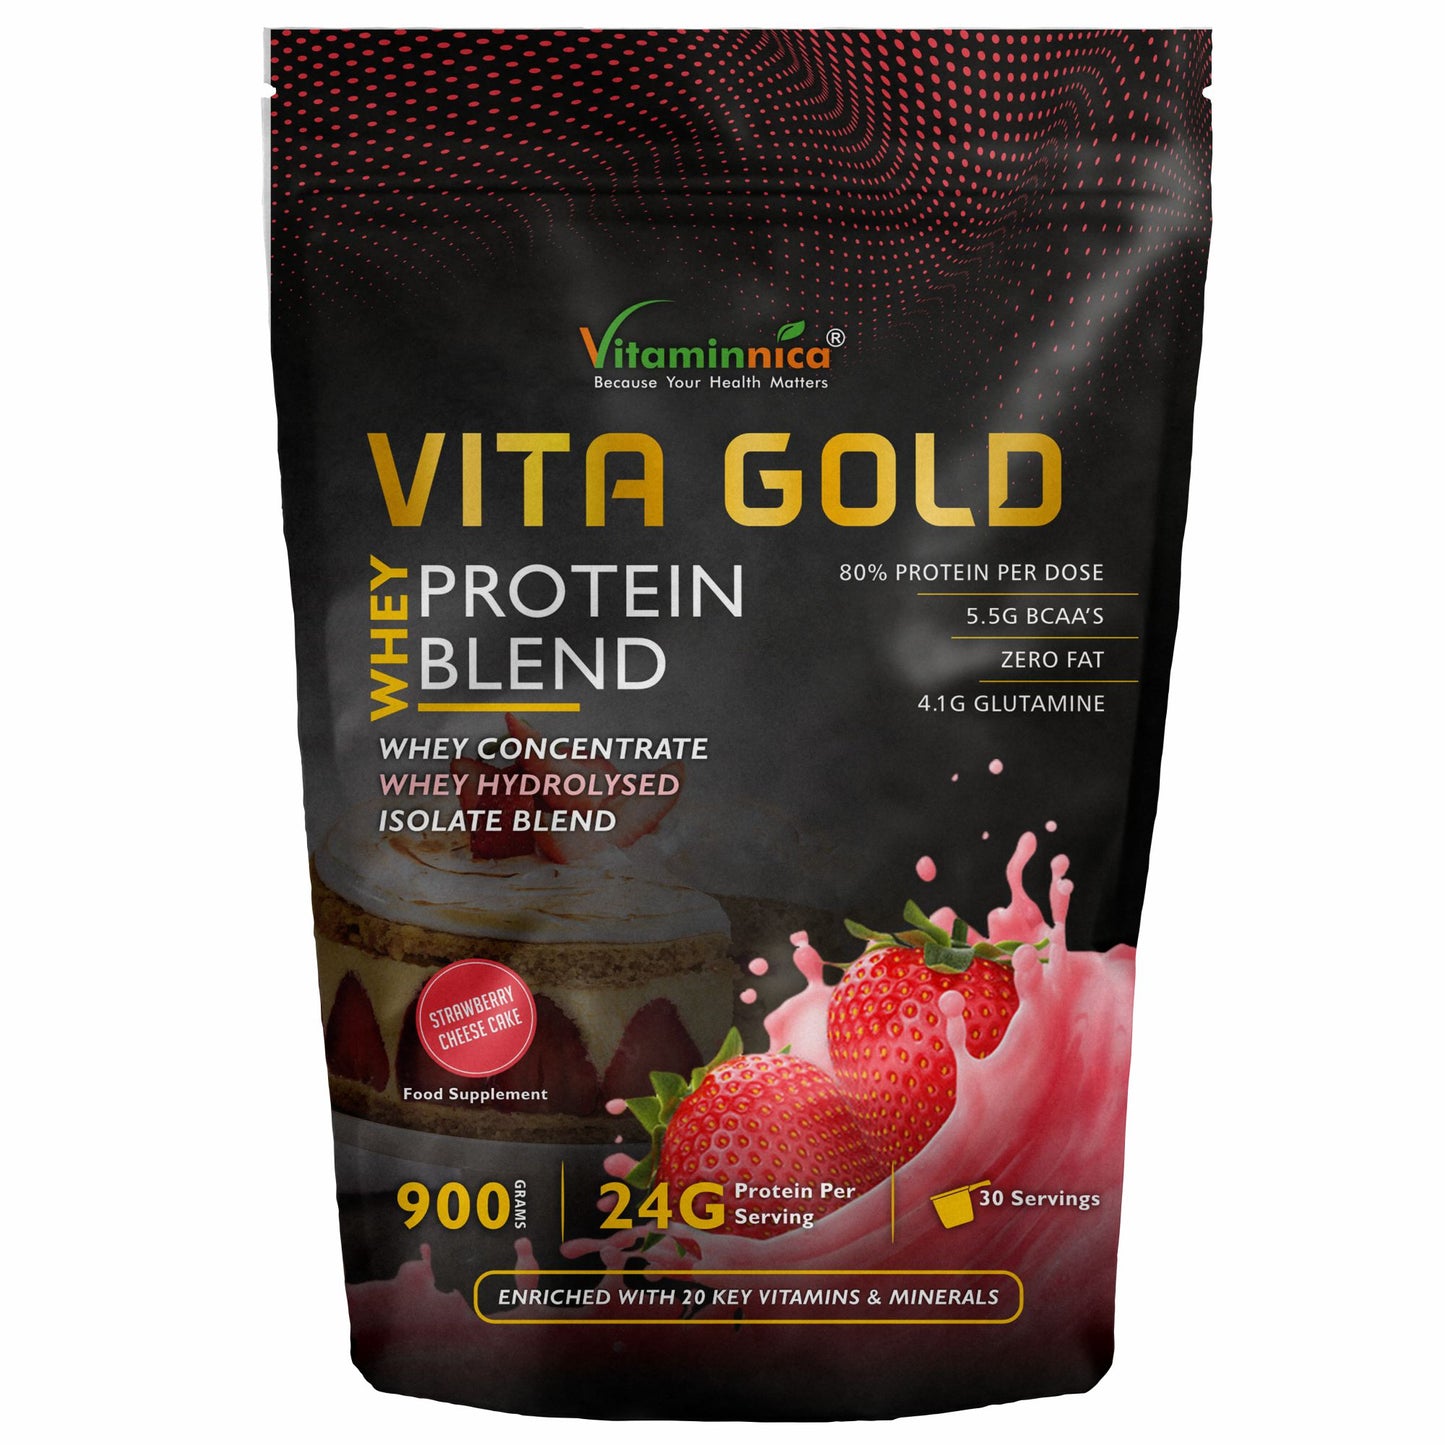 Vitaminnica Vita Gold Whey Protein Blend- Irish Cholocate Flavour | Whey Concentrate, Hydrolysed, Isolate Blend | 900gms - 30 Servings - Vitaminnica Healthcare